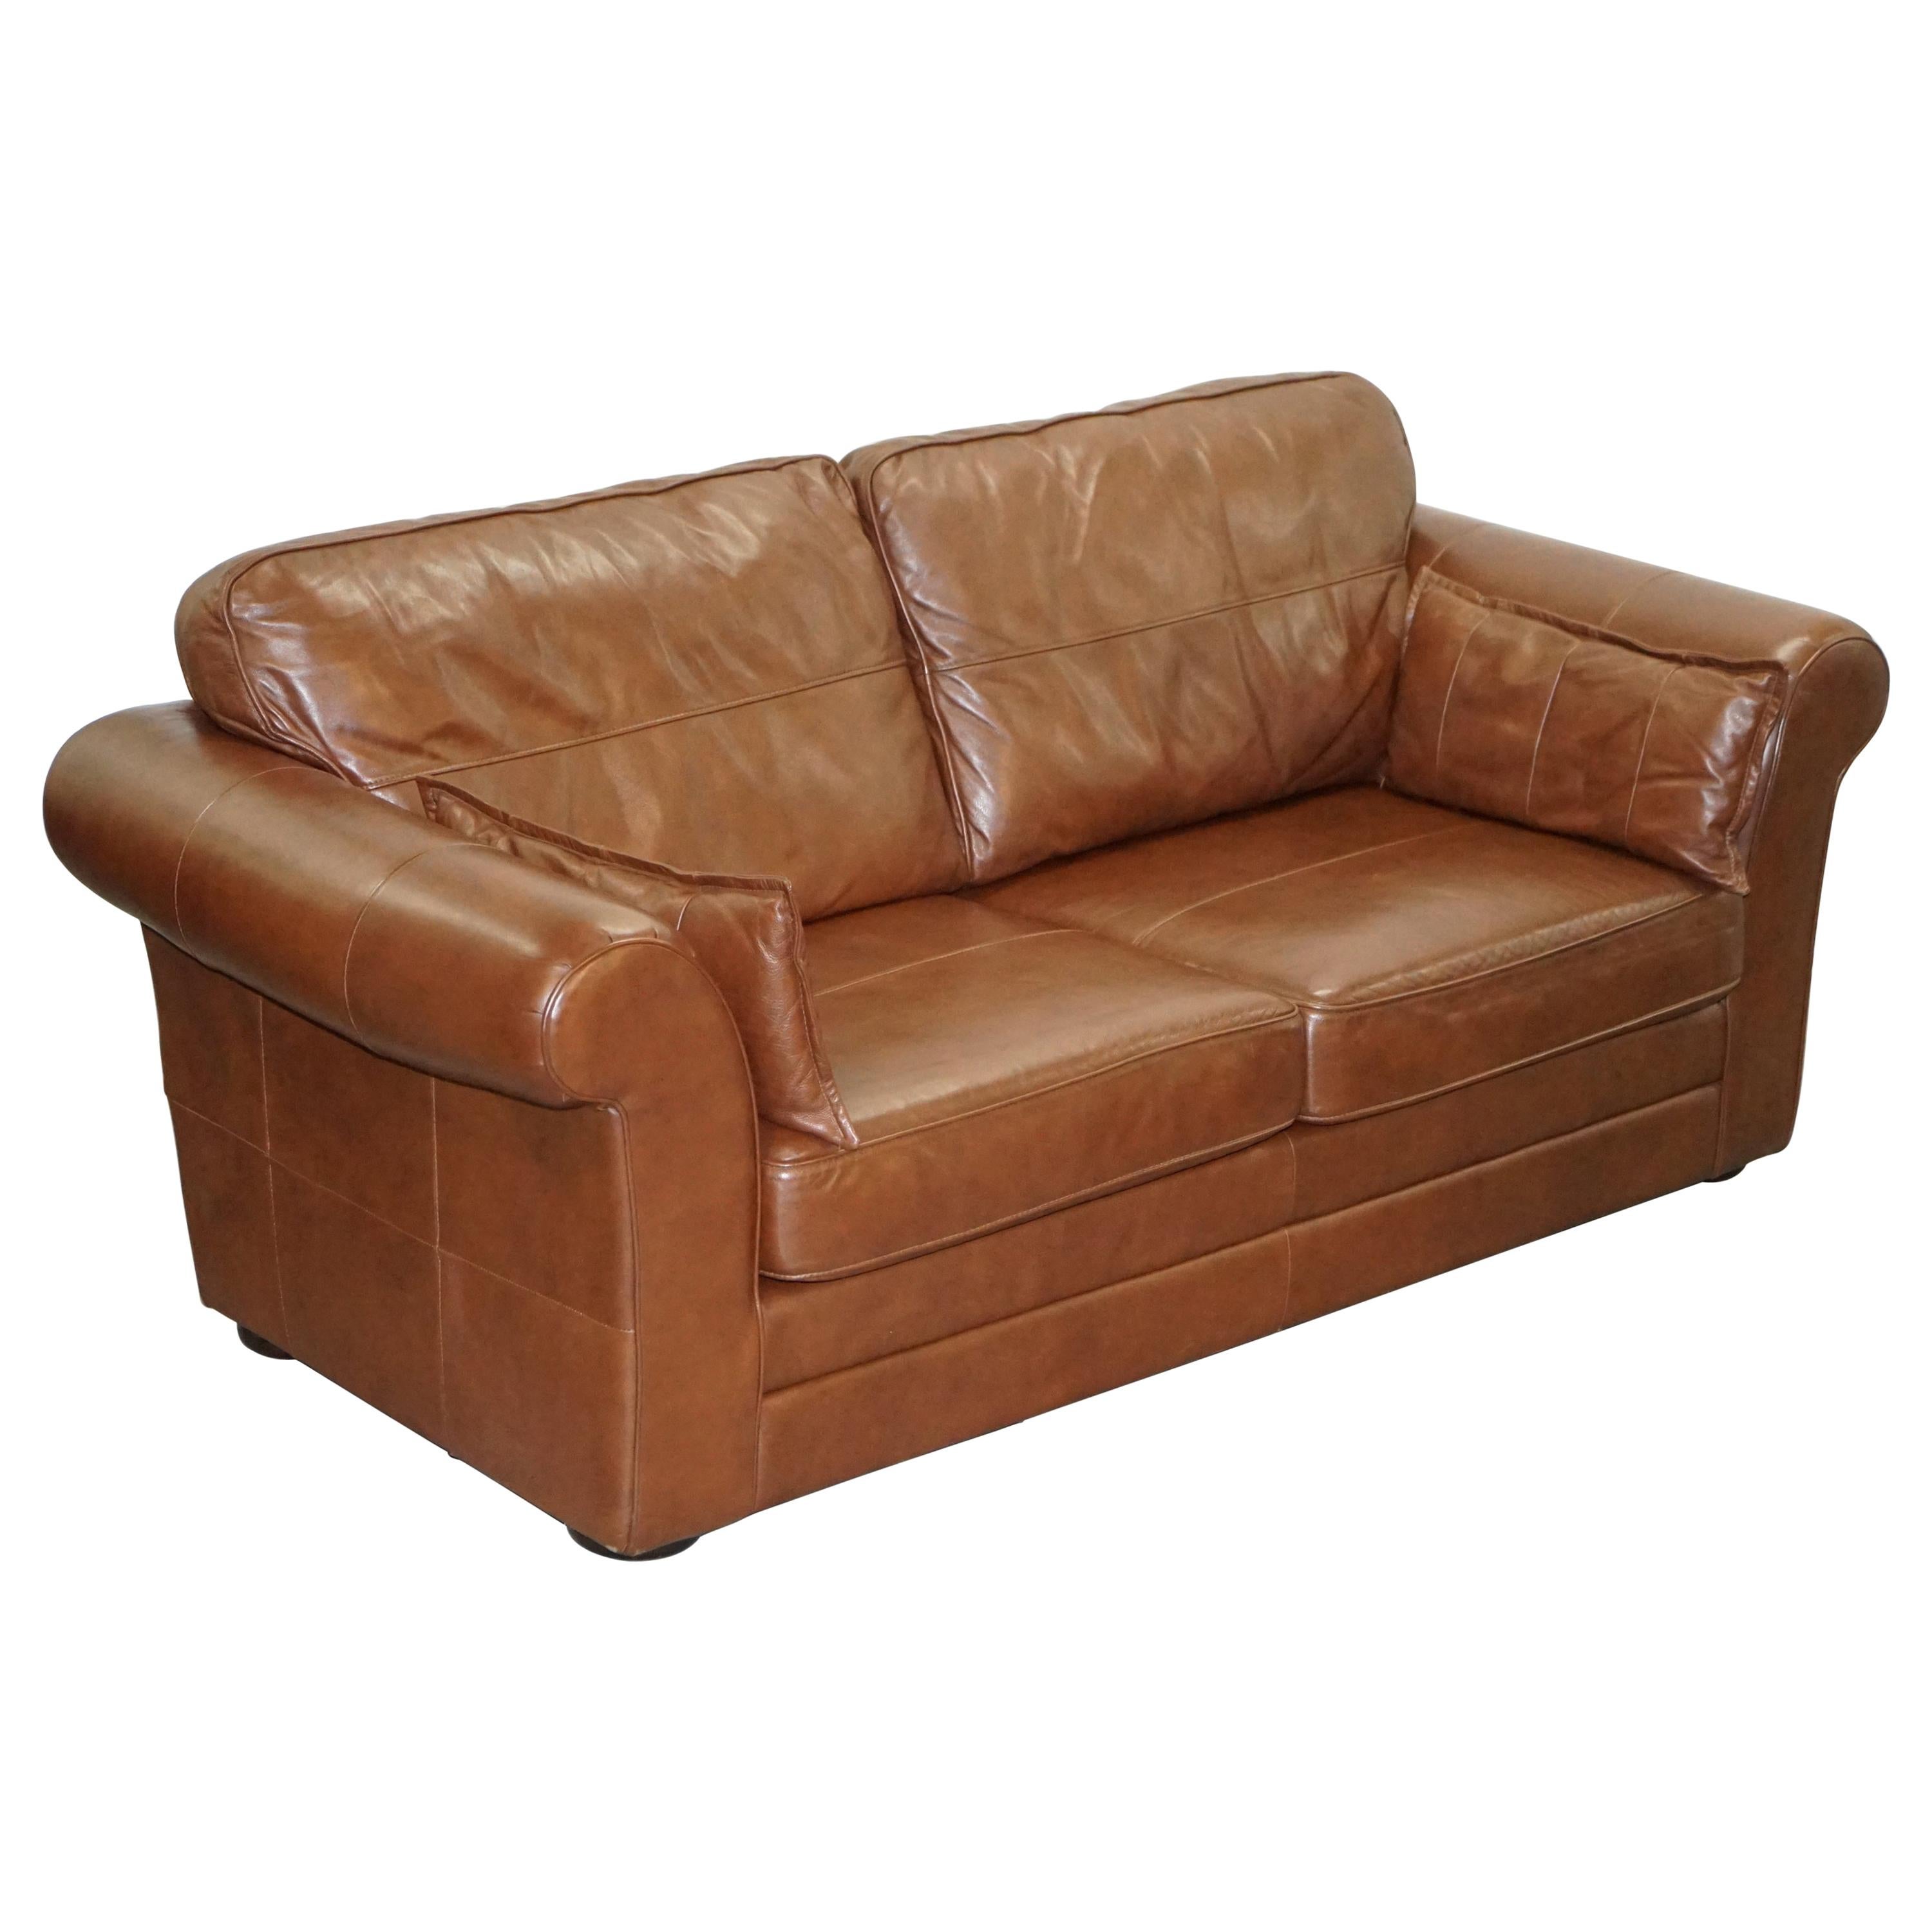 Contemporary Brown Leather Large Comfortable Three Seat Sofa Part of Large Suite